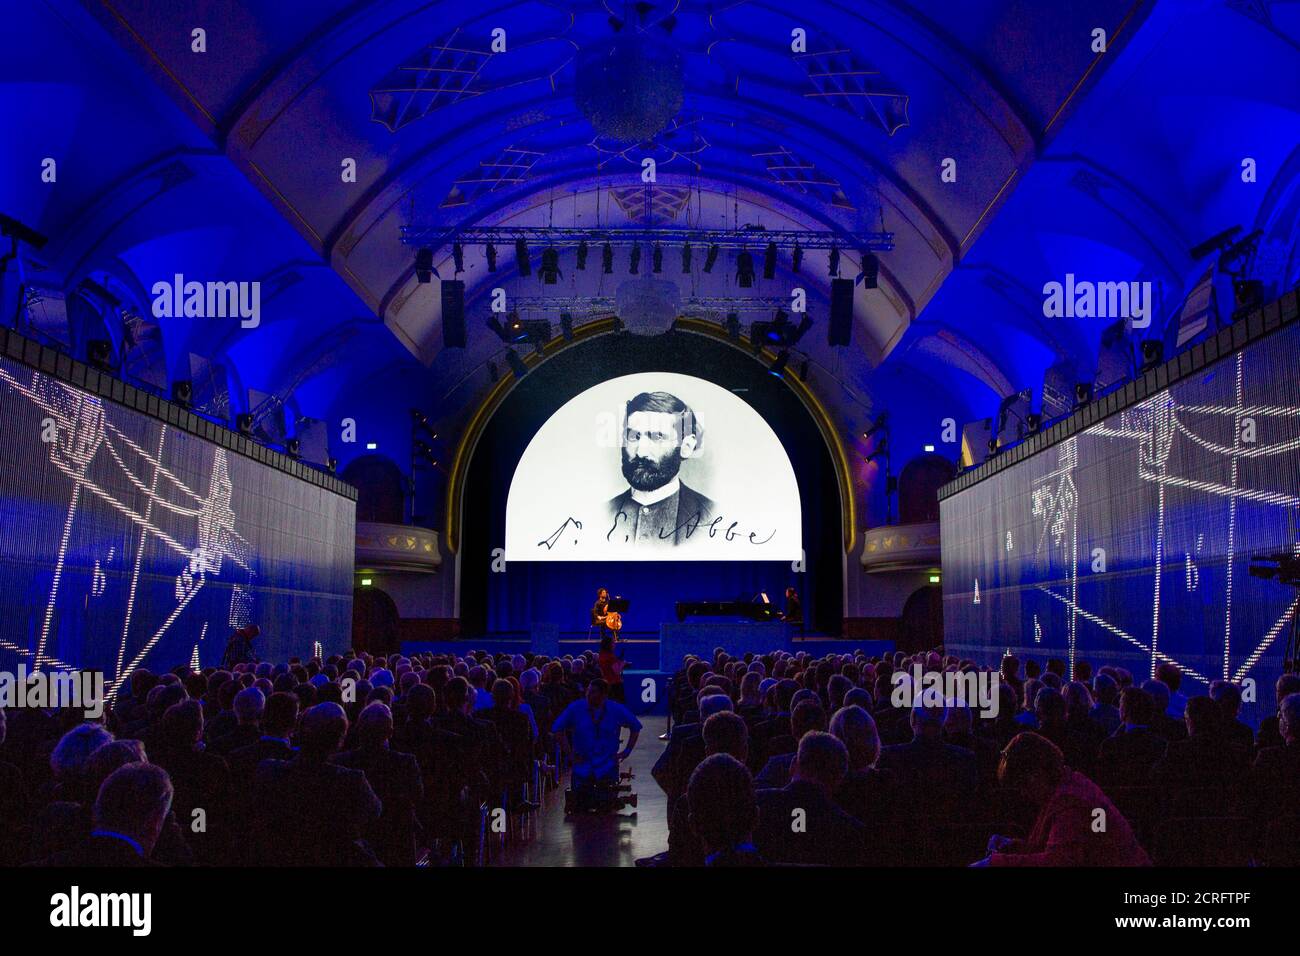 A projection shows the portrait of German optical scientist and initiator of the Carl Zeiss foundation Ernst Abbe during a ceremony marking the 125th anniversary of the foundation in Jena, May 19, 2014. REUTERS/Thomas Peter (GERMANY - Tags: POLITICS SCIENCE TECHNOLOGY BUSINESS) Stock Photo